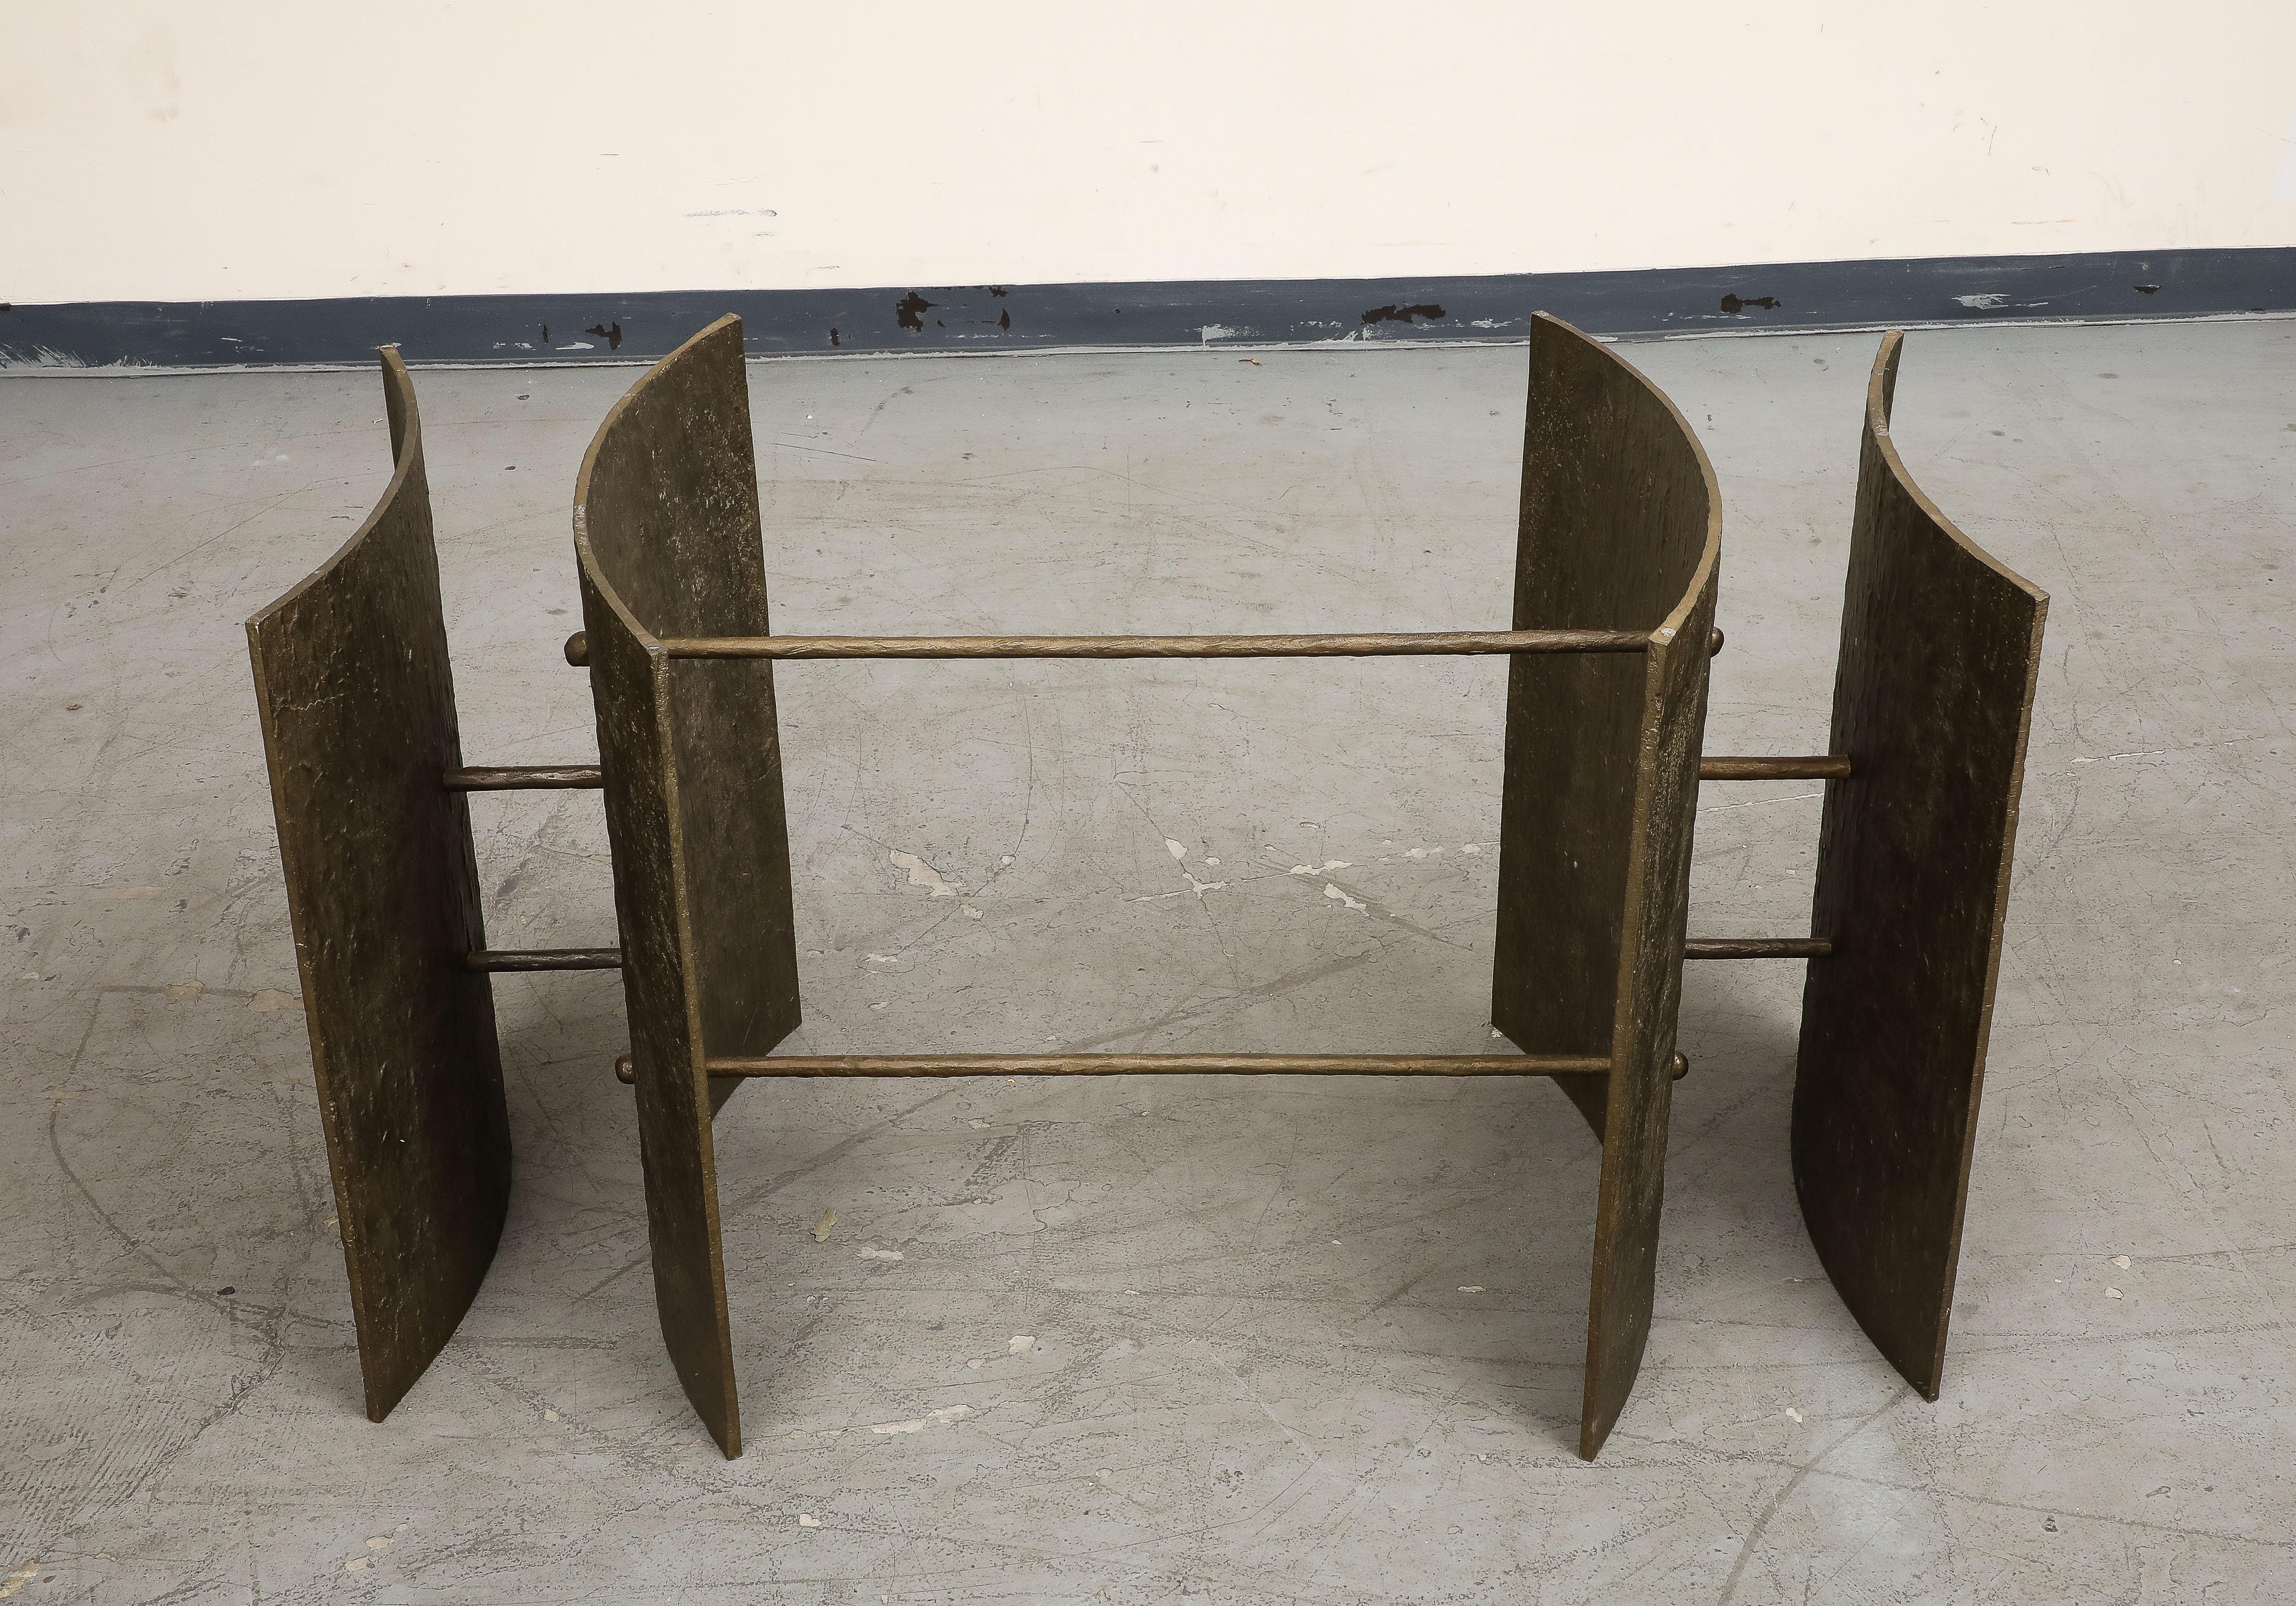 Exceptional Italian Full Bronze Sculptural Table Base, circa 1970s For Sale 3